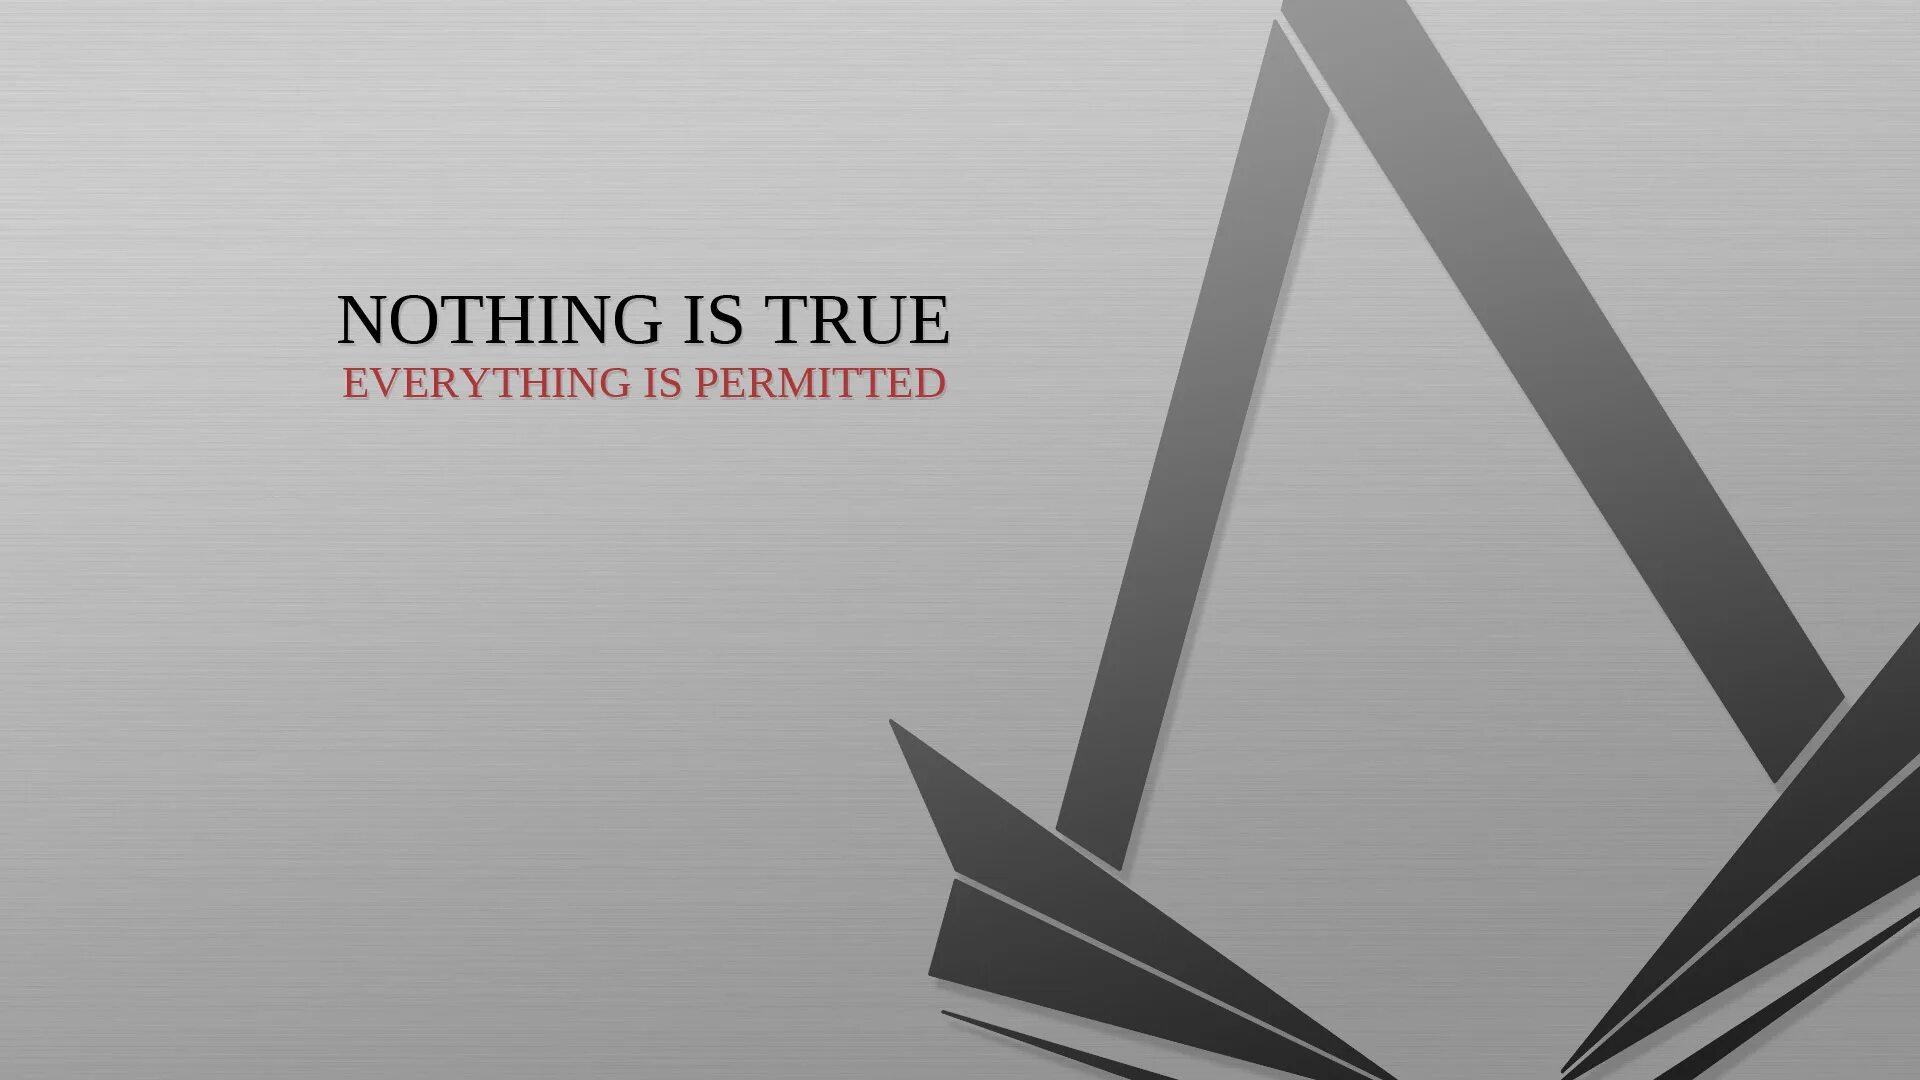 Nothing is true everything is permitted. Assassins Creed 2 Brotherhood обои. Nothing true everything permitted. Обои Минимализм ассасин. True everything